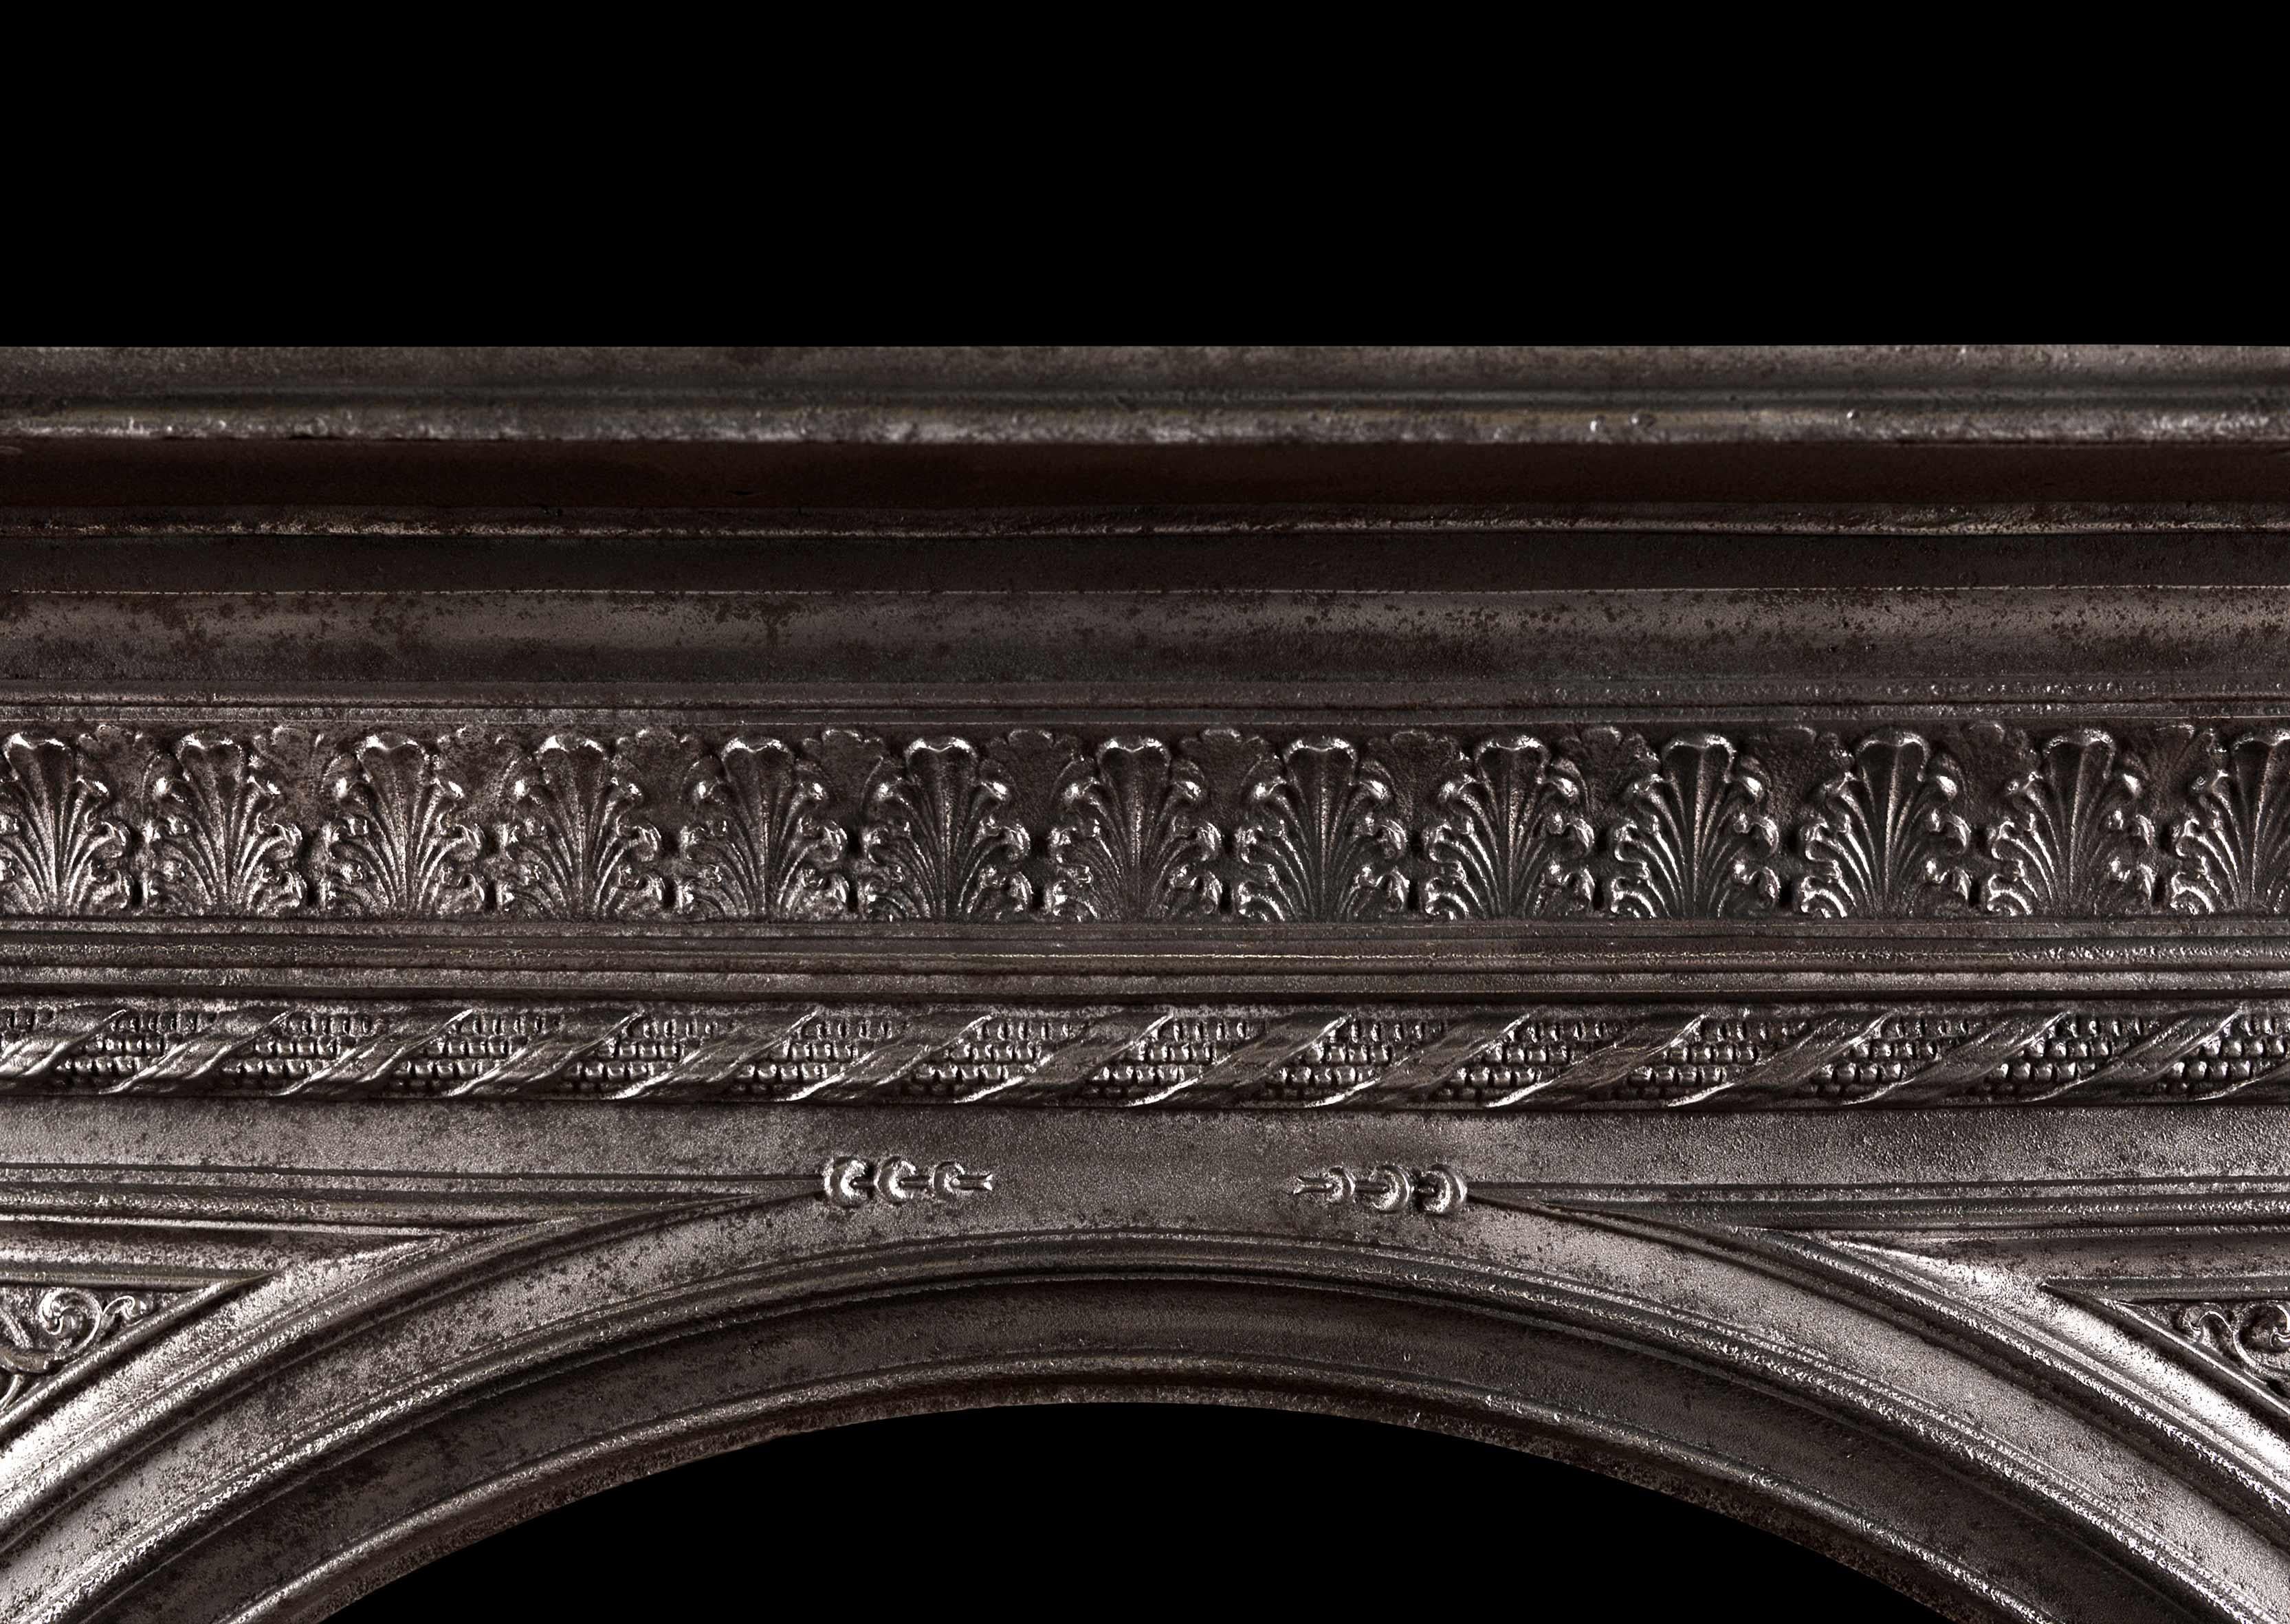 An attractive mid 19th century English cast iron fireplace. The frieze with acanthus leaf detailing, the jambs with scrolled brackets and rope mouldings to inner and outer edges. The arched opening with spandrels with foliage detailing. Worn